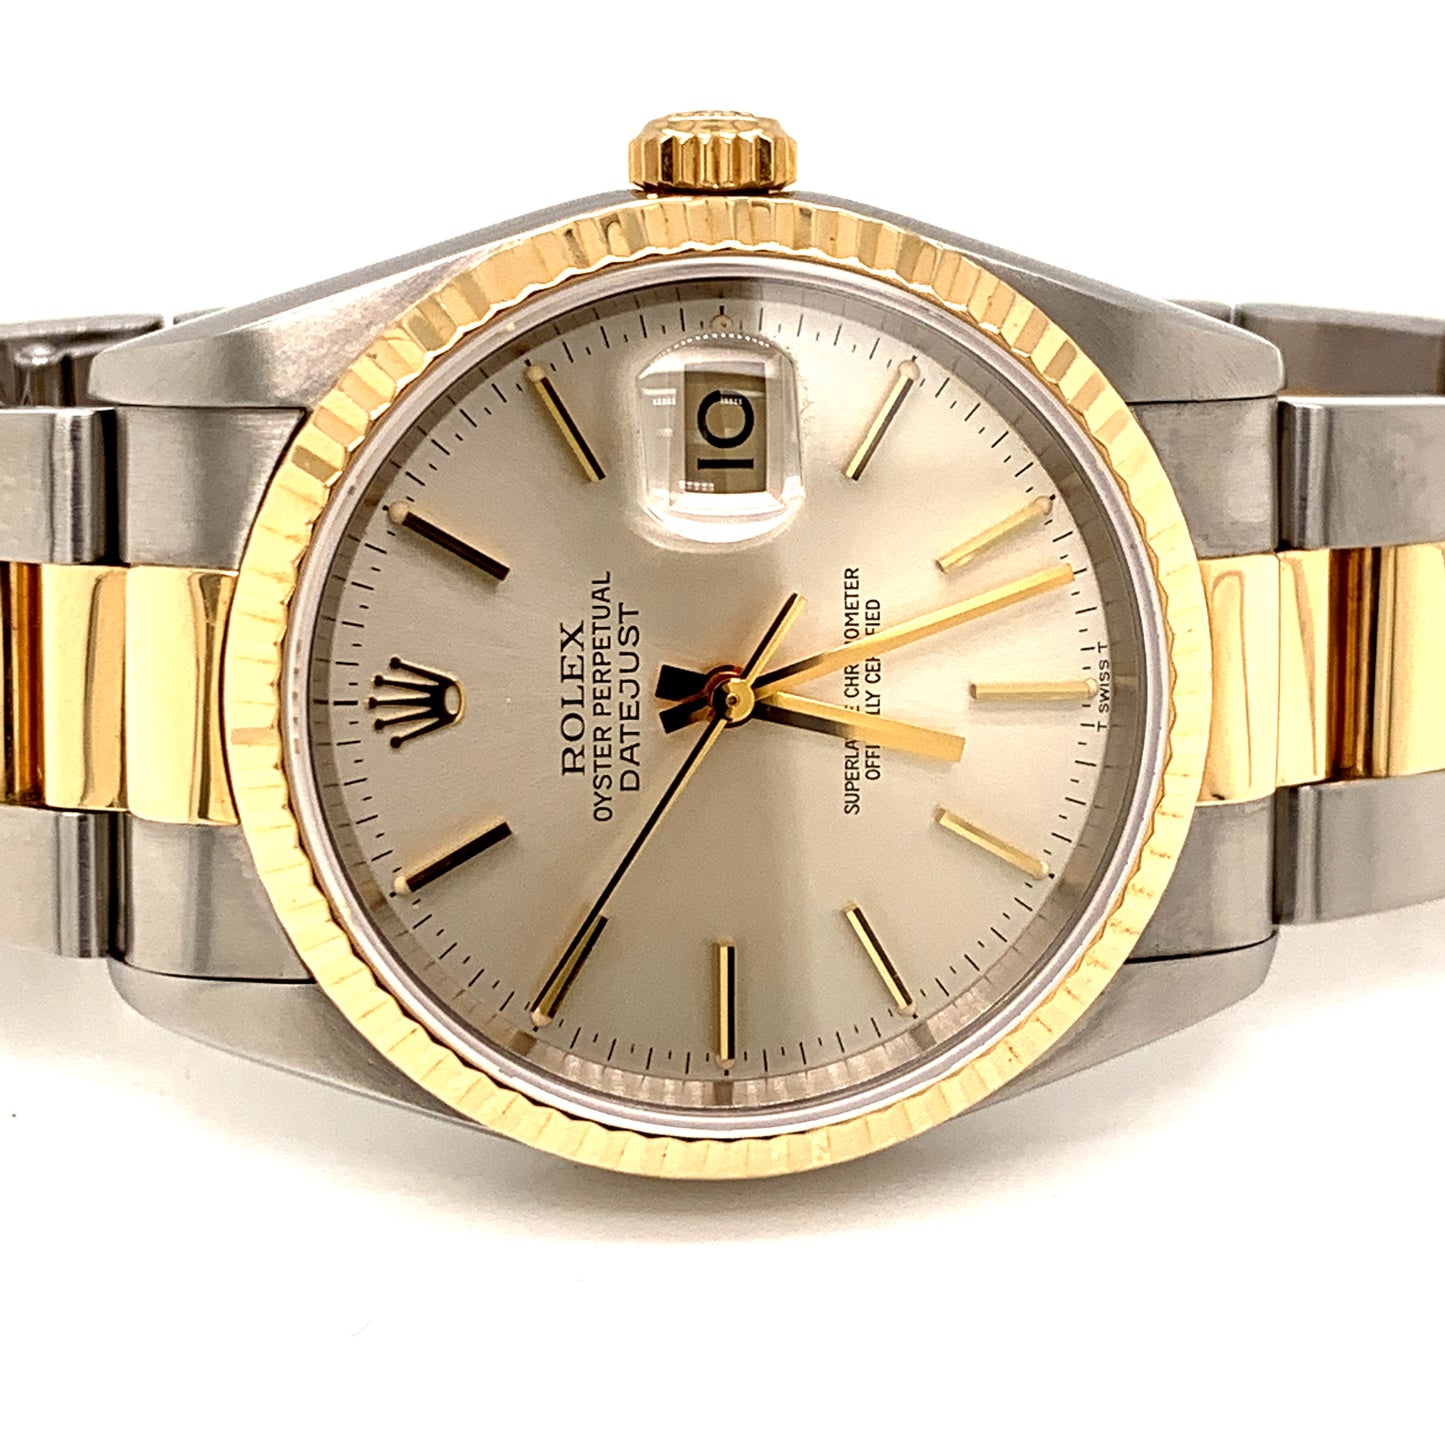 Rolex Datejust 18k Stainless Steel 16233 Champagne dial Oyster band